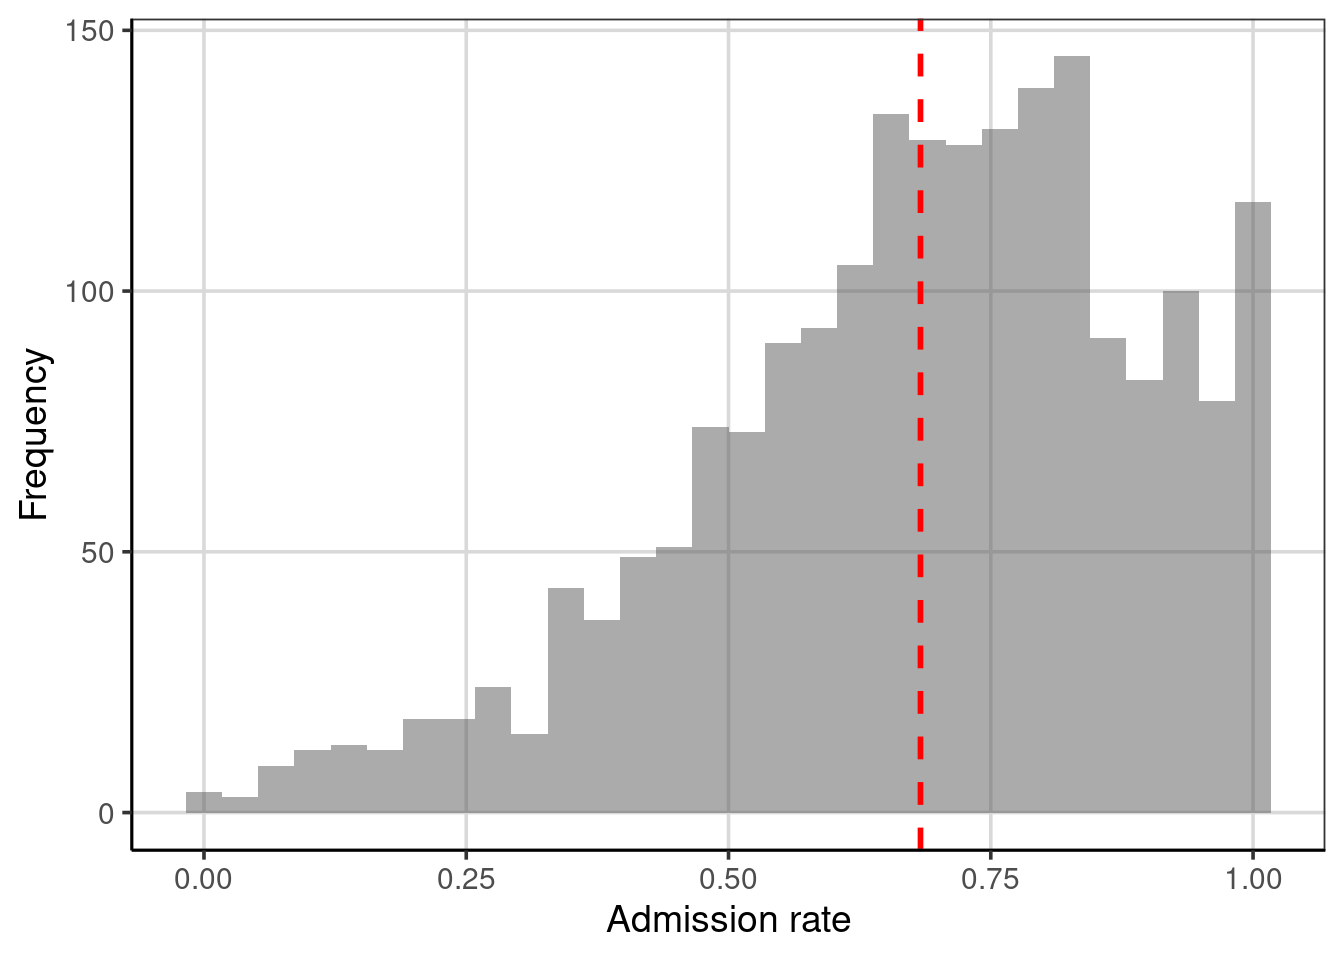 Distribution of admission rates for thw 2,019 institutions of higher education. The mean admission rate is displayed as a red, dashed line.